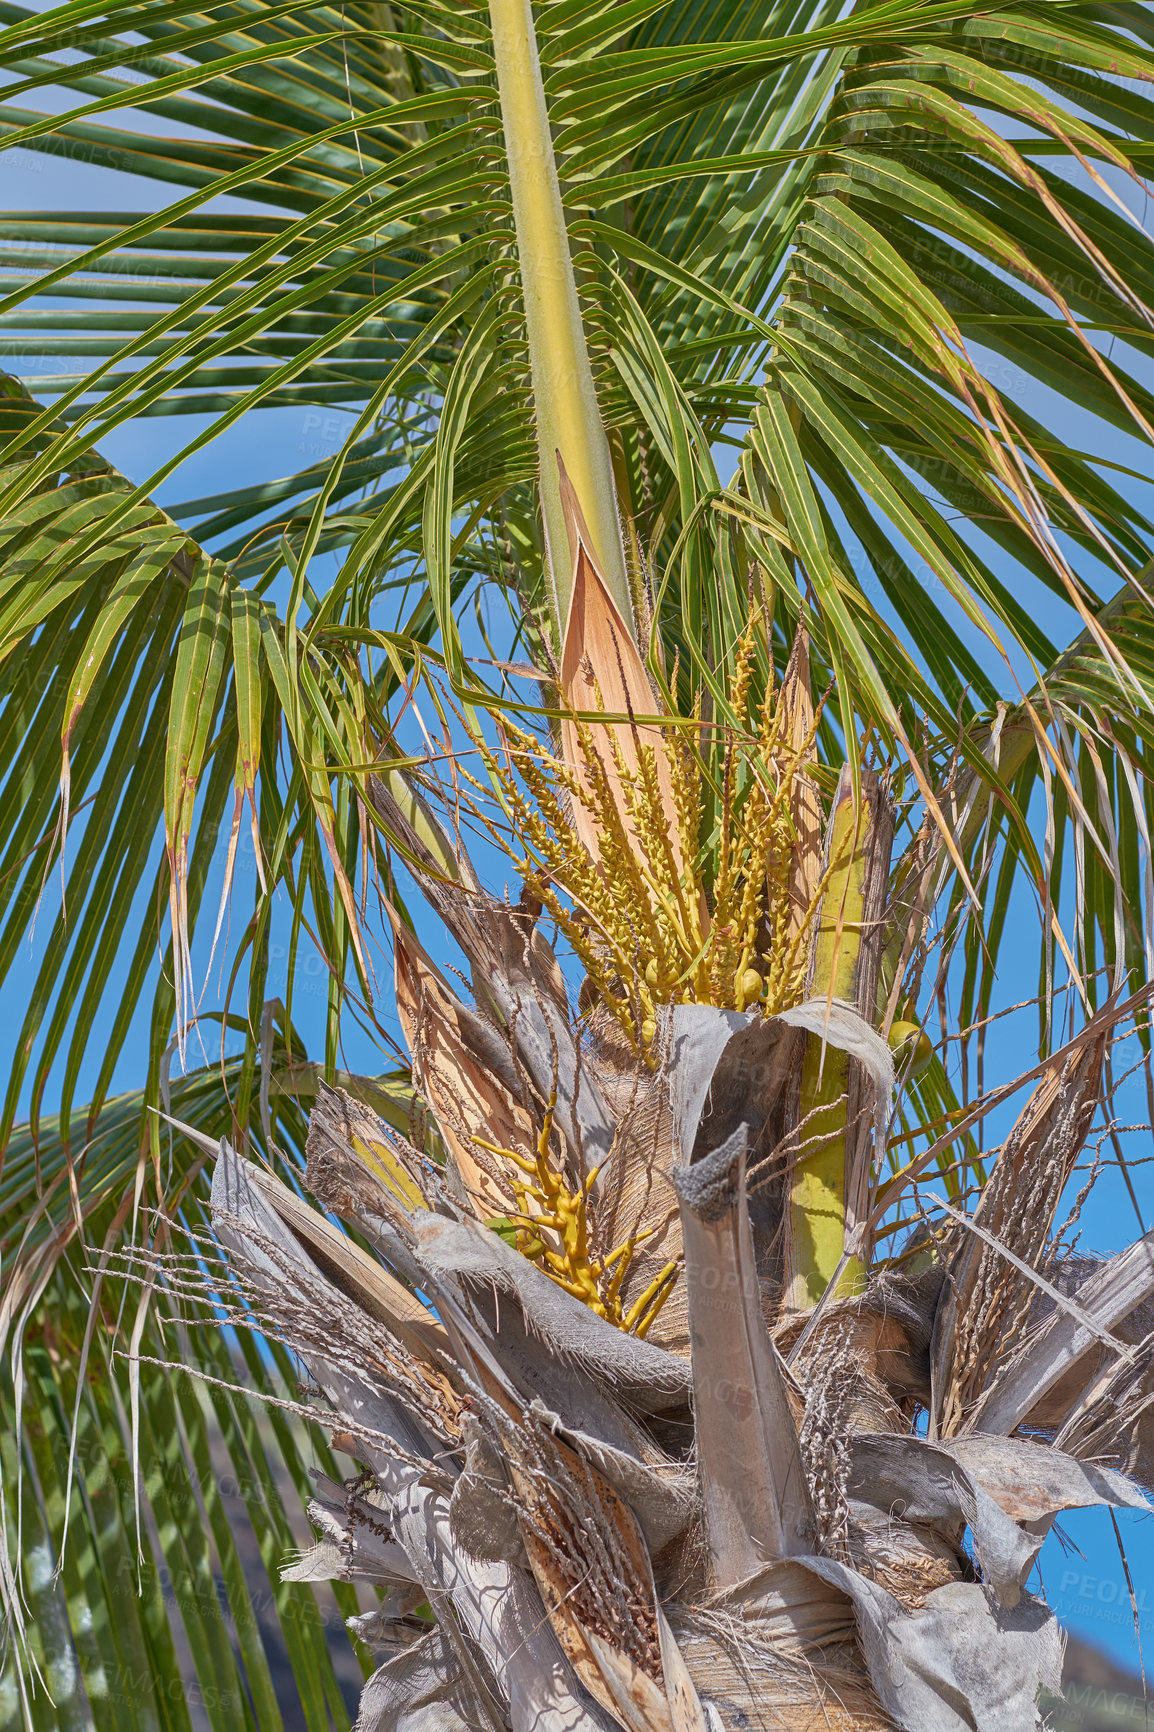 Buy stock photo A coconut tree with lush green leaves shining under the sun in an exotic, paradise getaway or tropical tourism destination in La Palma, Canary islands, Spain. A growing palm tree from below